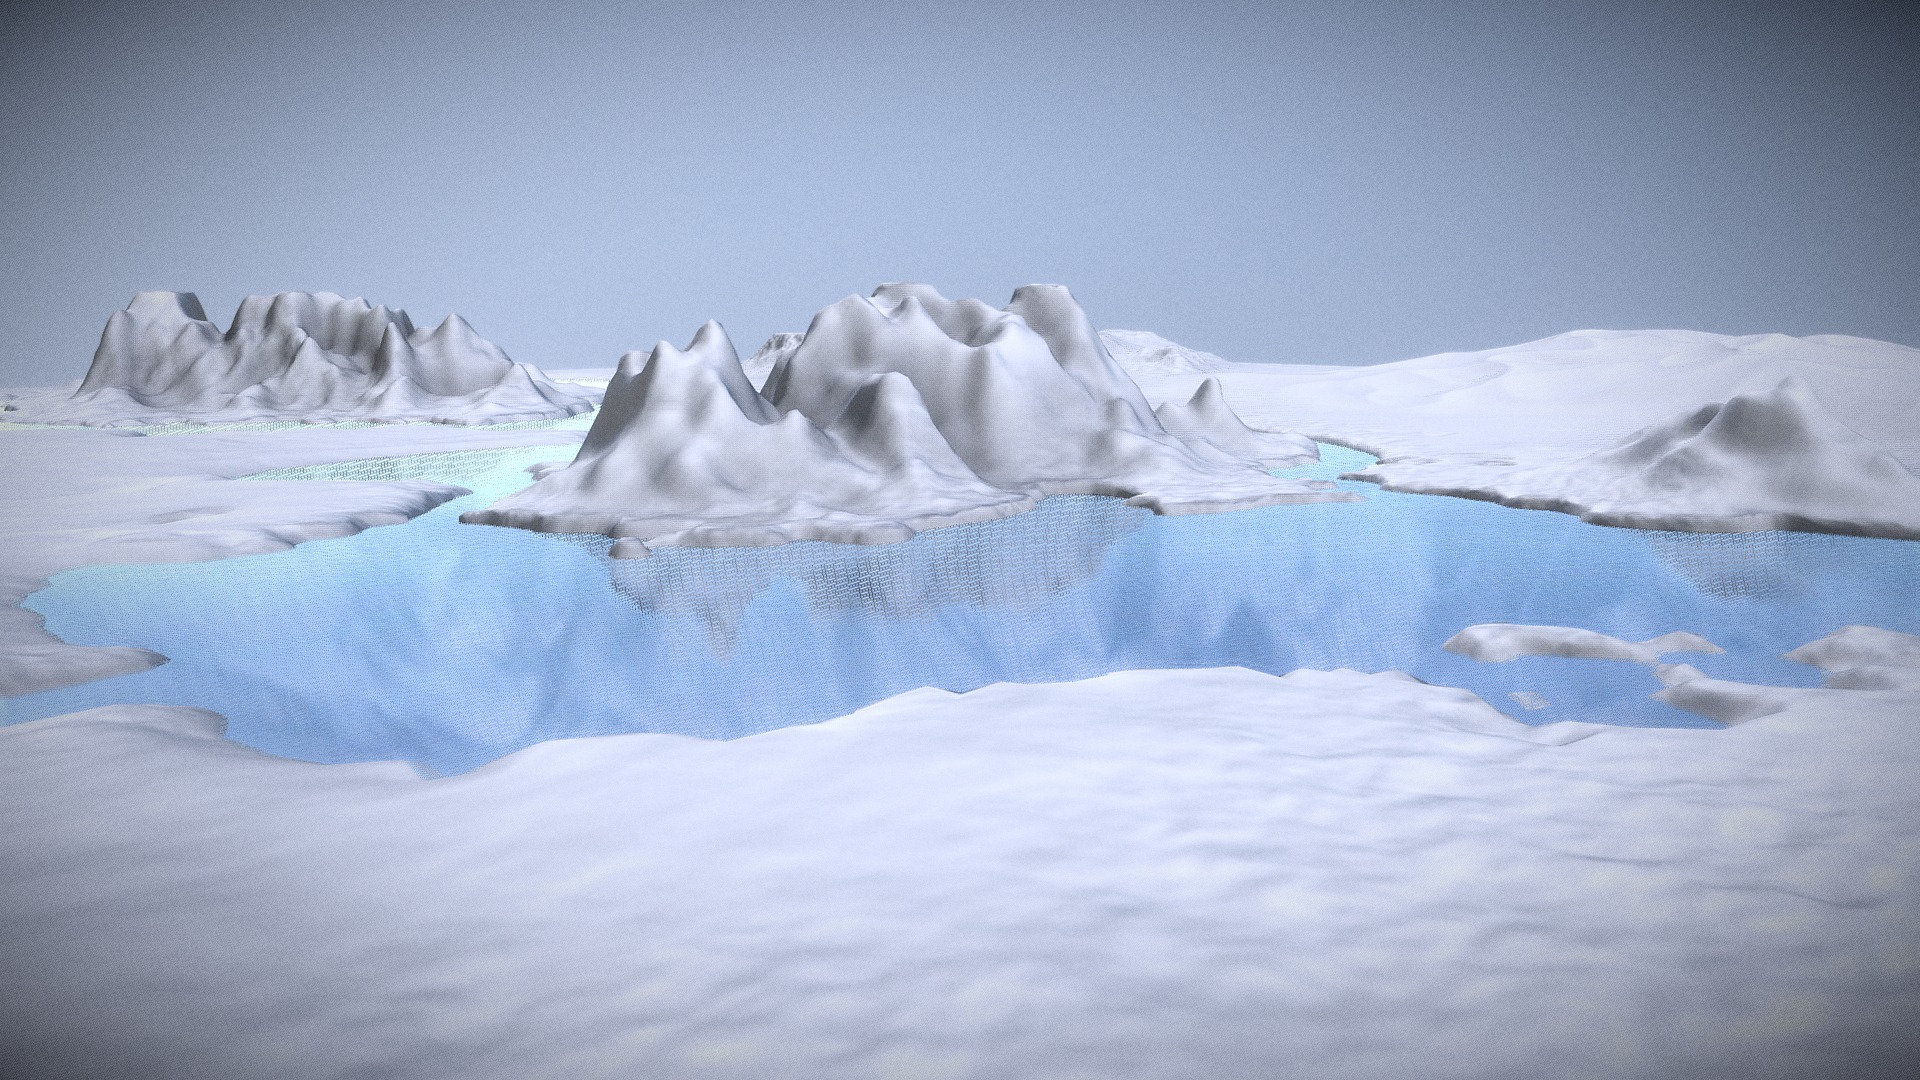 3D model Winter Environment / Test 2 - This is a 3D model of the Winter Environment / Test 2. The 3D model is about a large glacier in the snow.